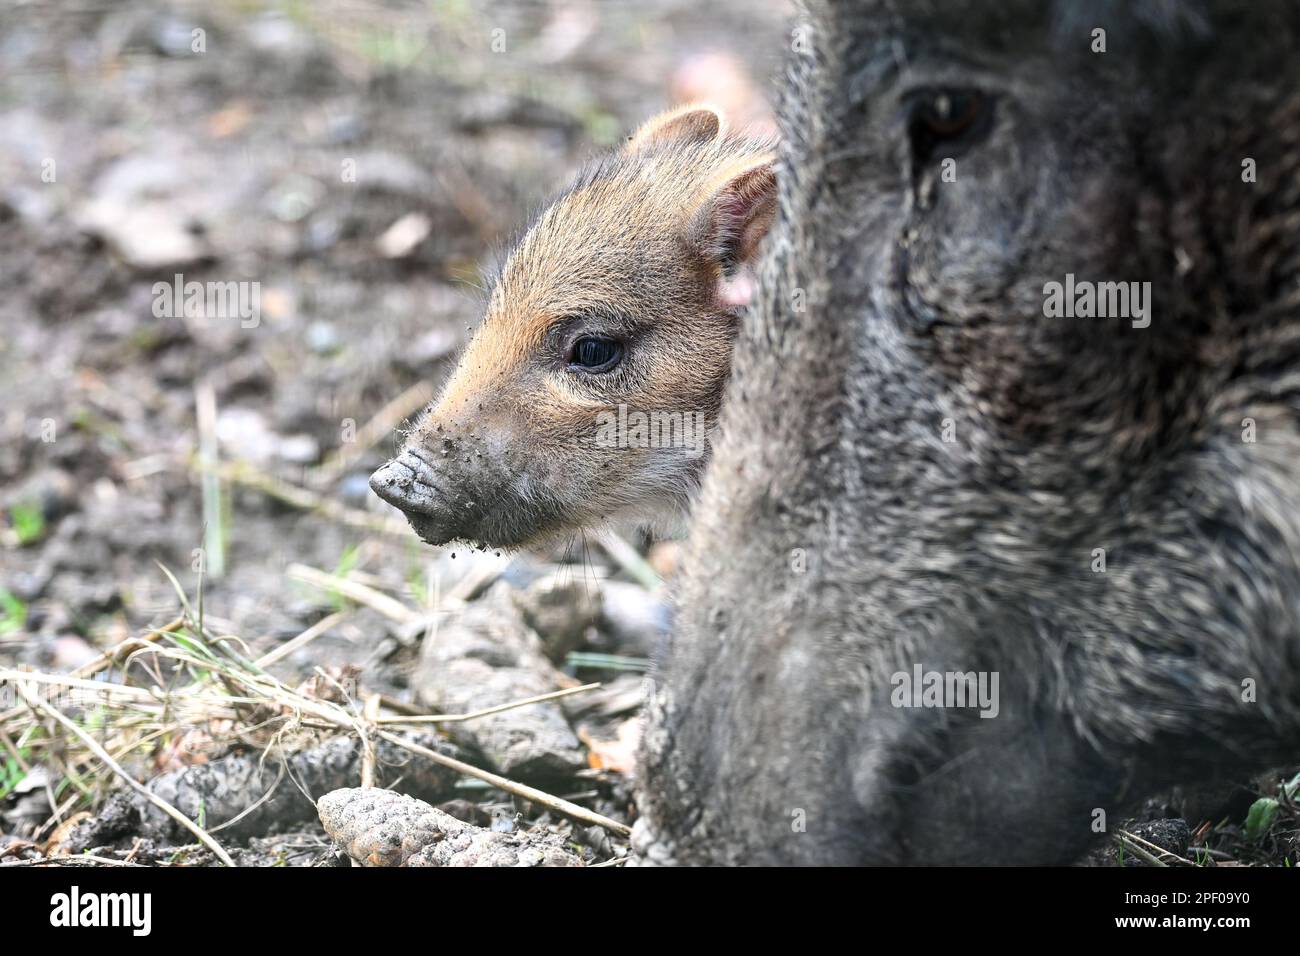 Ravensburg, Germany. 16th Mar, 2023. A striped young boar peeks out from behind its mother above Ravensburg in a game preserve. The young animals were born a few days ago. Young wild boars are suckled for around four months and retain their stripes for that long. Credit: Felix Kästle/dpa/Alamy Live News Stock Photo